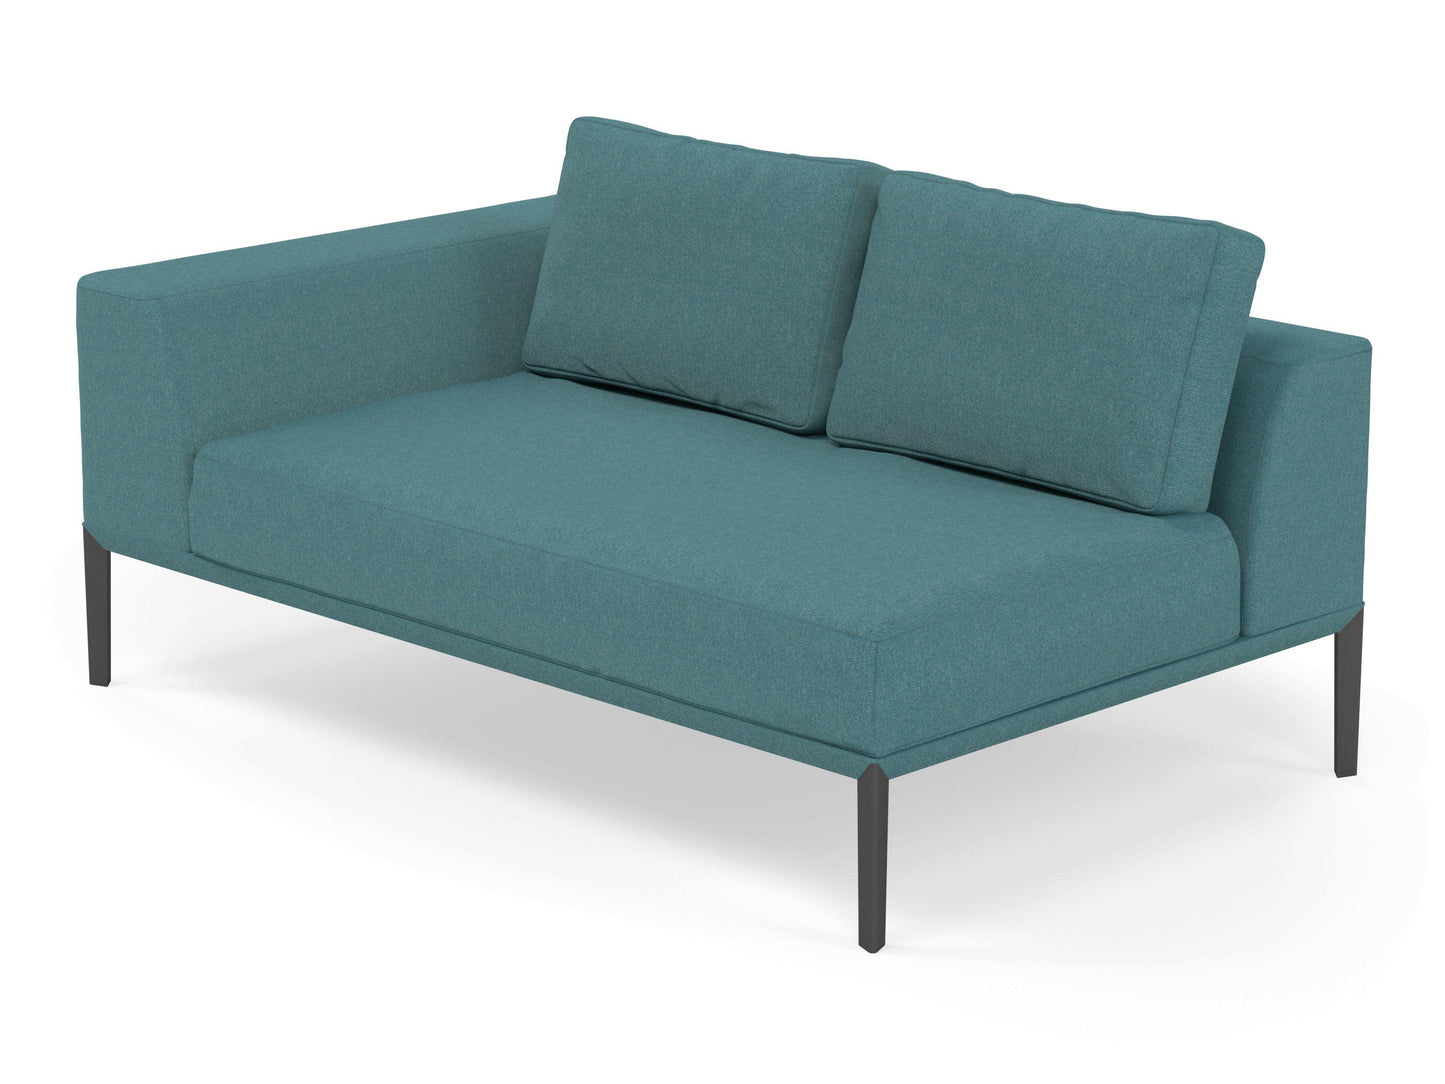 Modern 2 Seater Chaise Lounge Style Sofa with Right Armrest in Teal Blue Fabric-Distinct Designs (London) Ltd